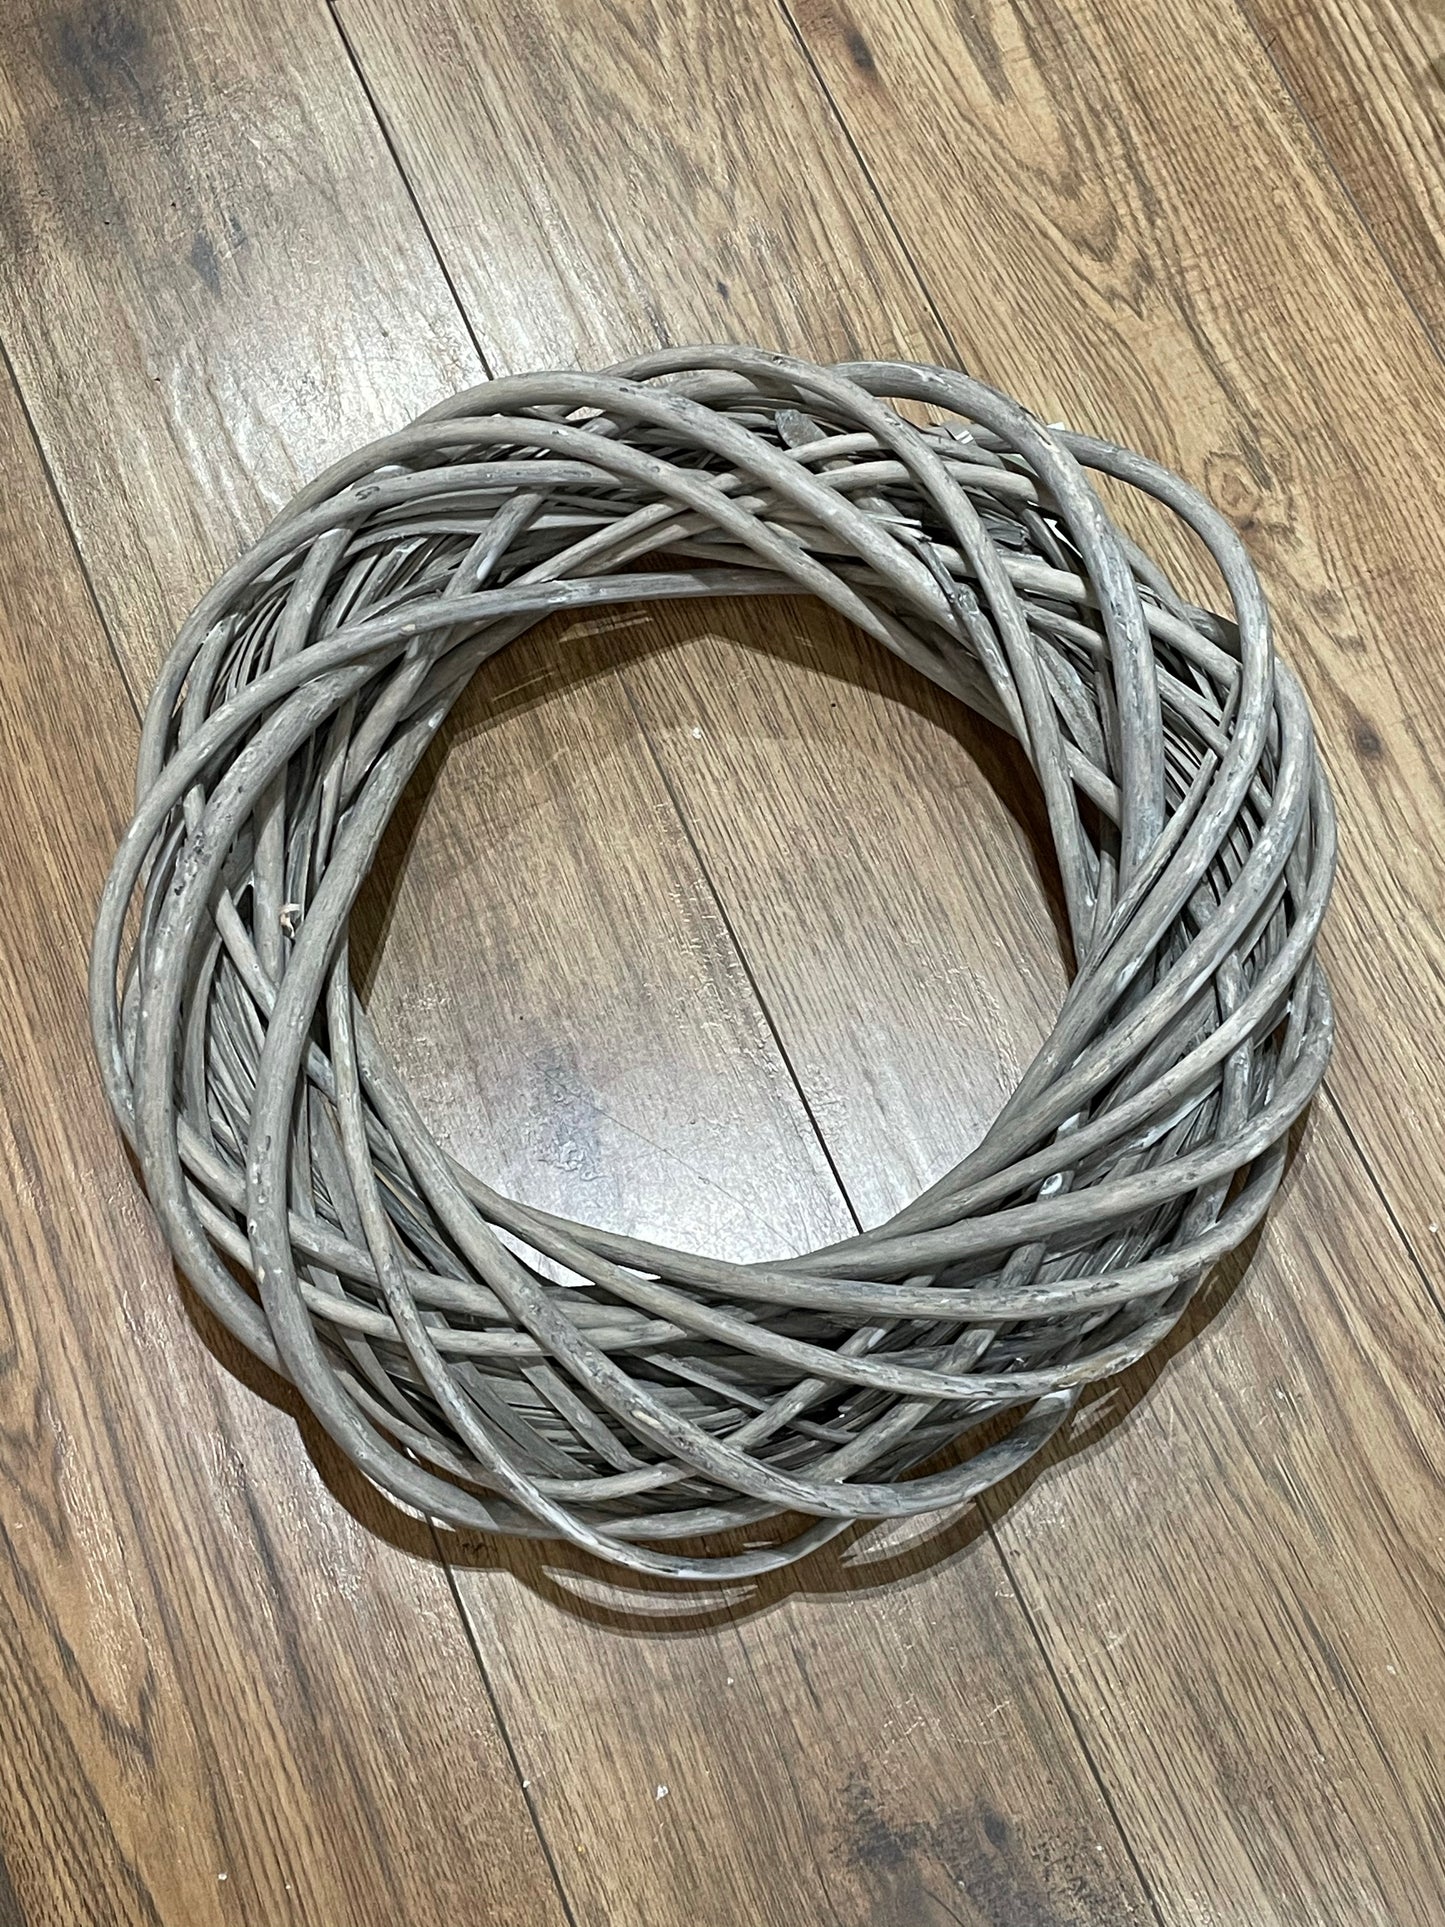 Woven Willow Wreath 16”